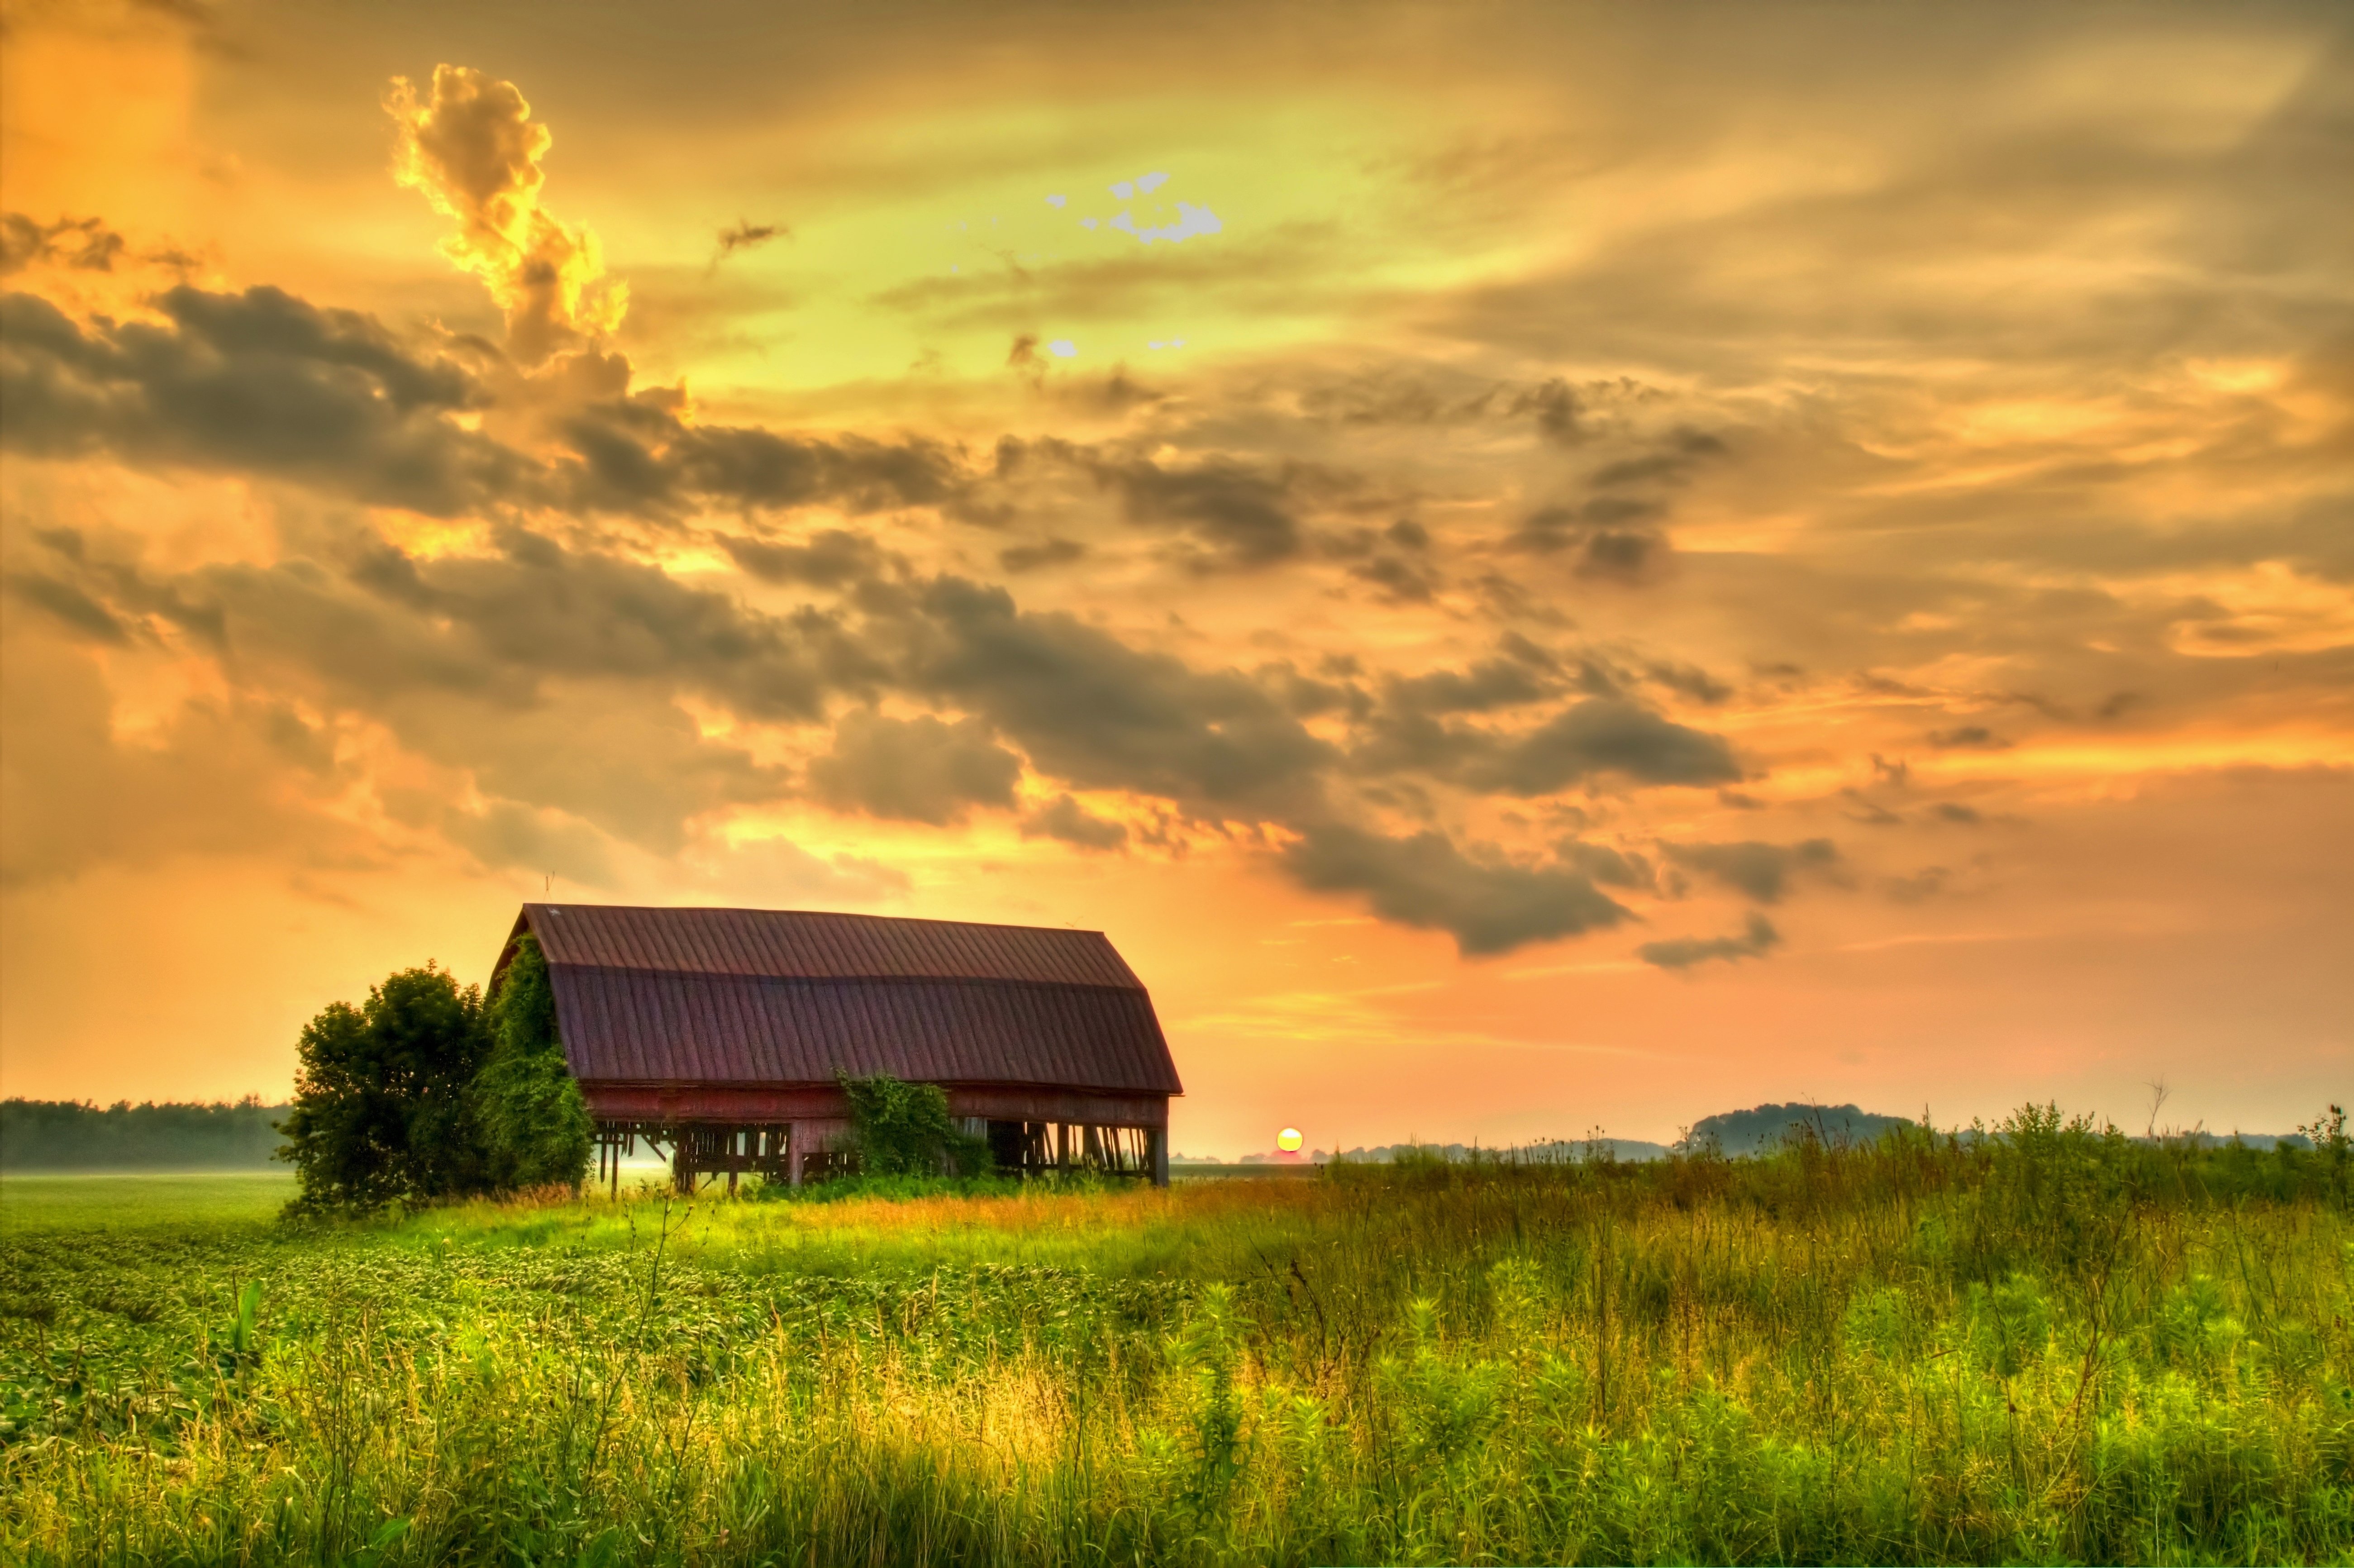 A sunset over a barn structure